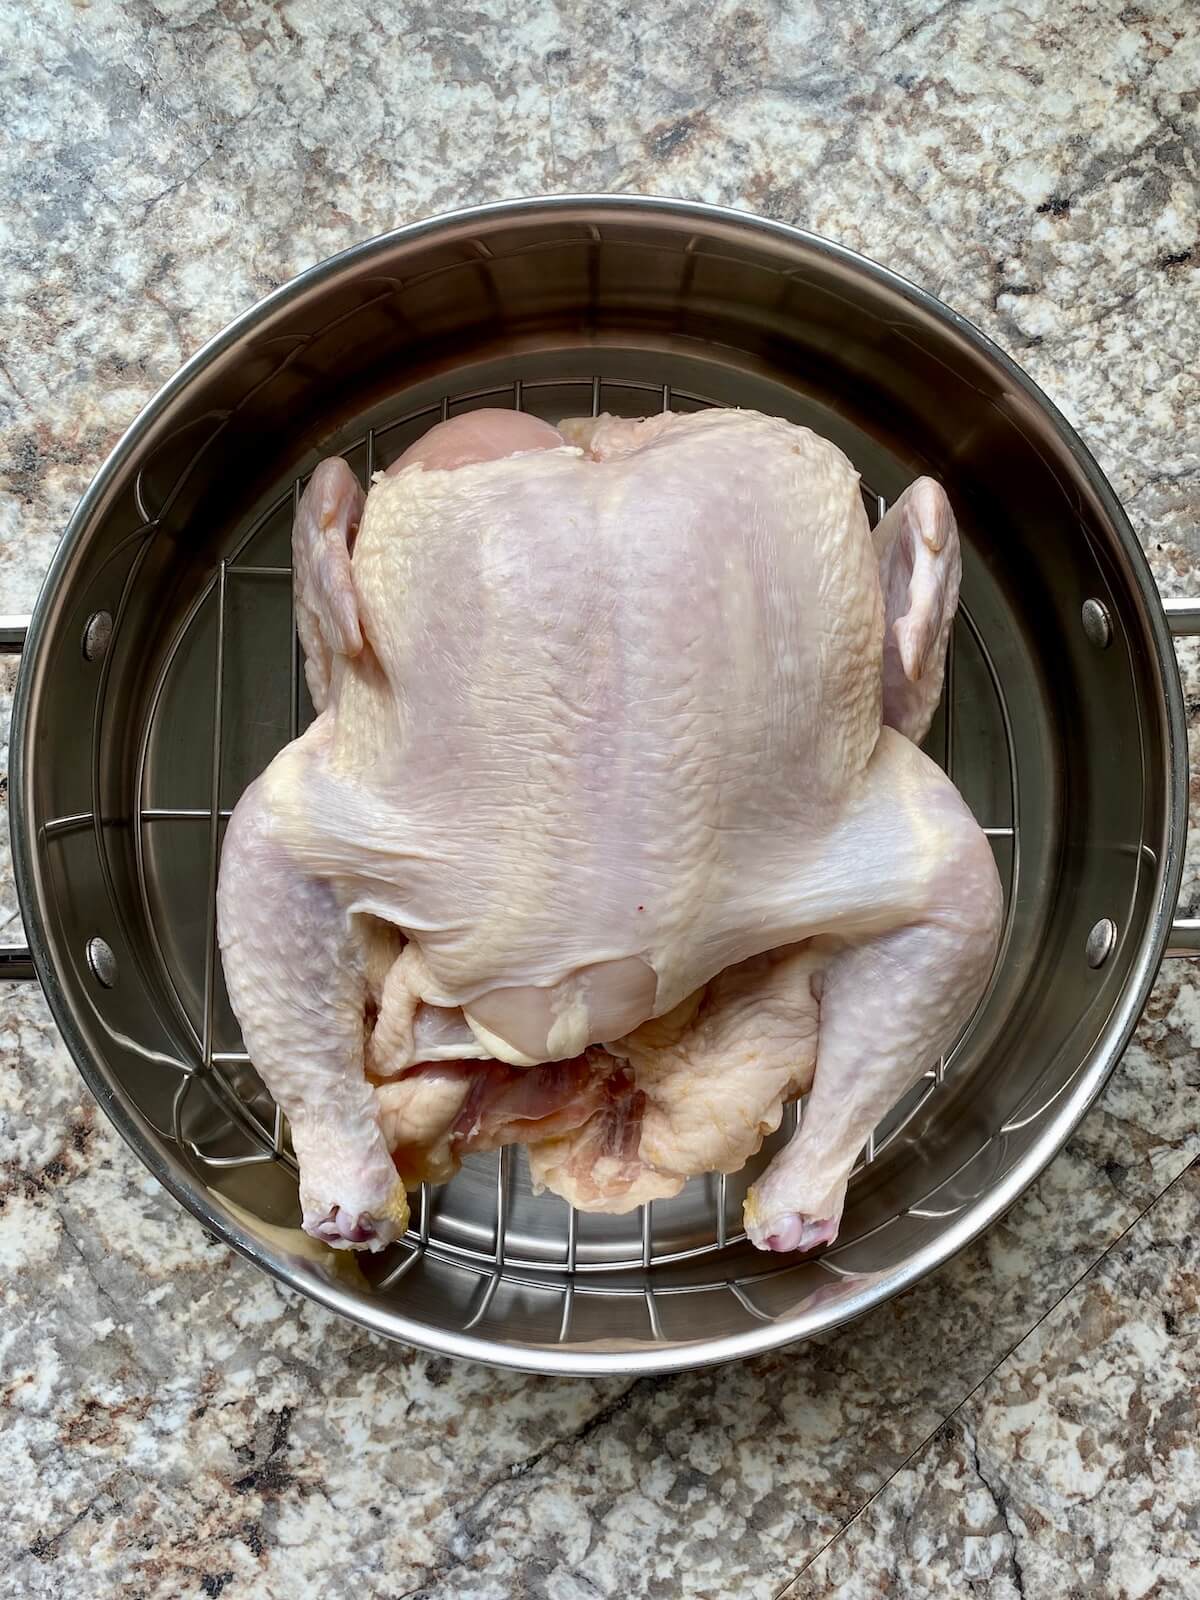 A whole chicken in a roasting pan.